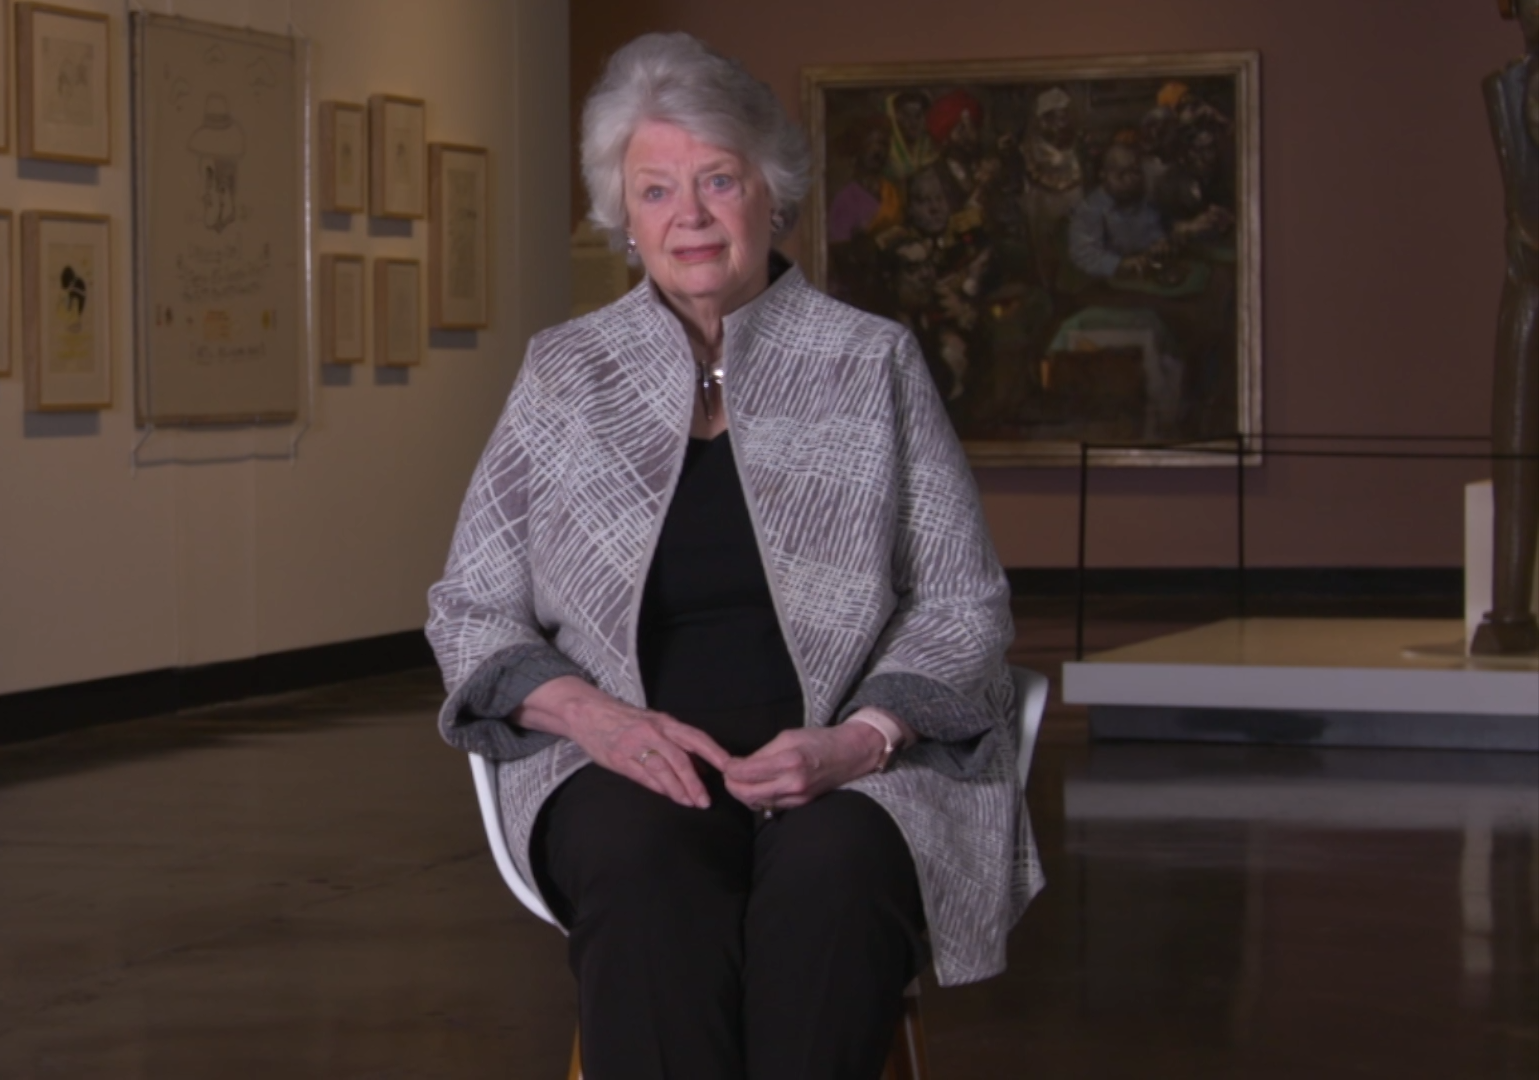 Woman in gray jacket and black top and pants sits in chair with artwork behind her.